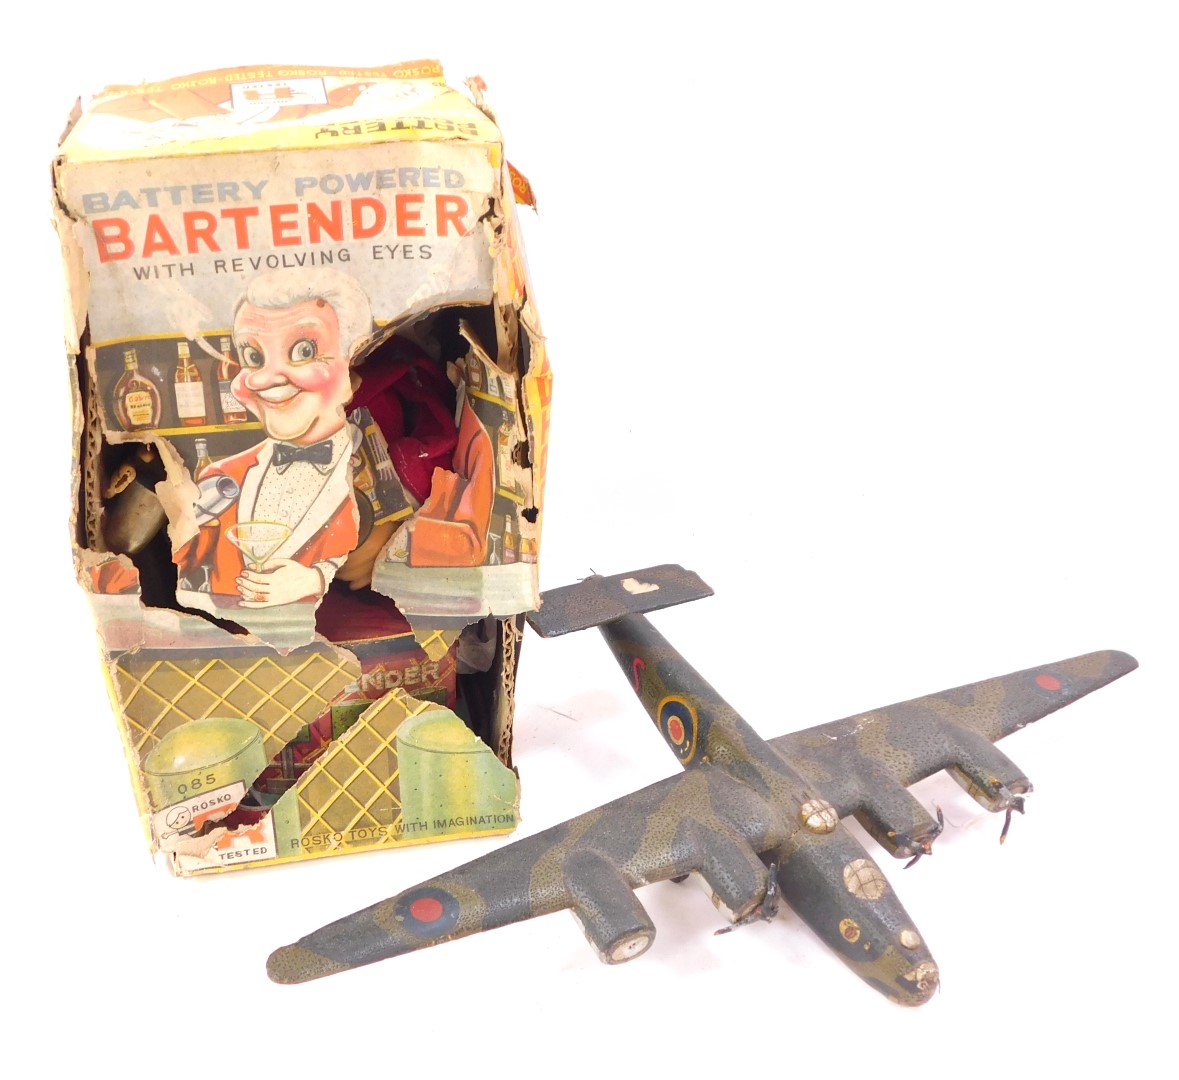 A scratch built model of a Liberator B24 Bomber, and a tin plate battery operated bar tender made by